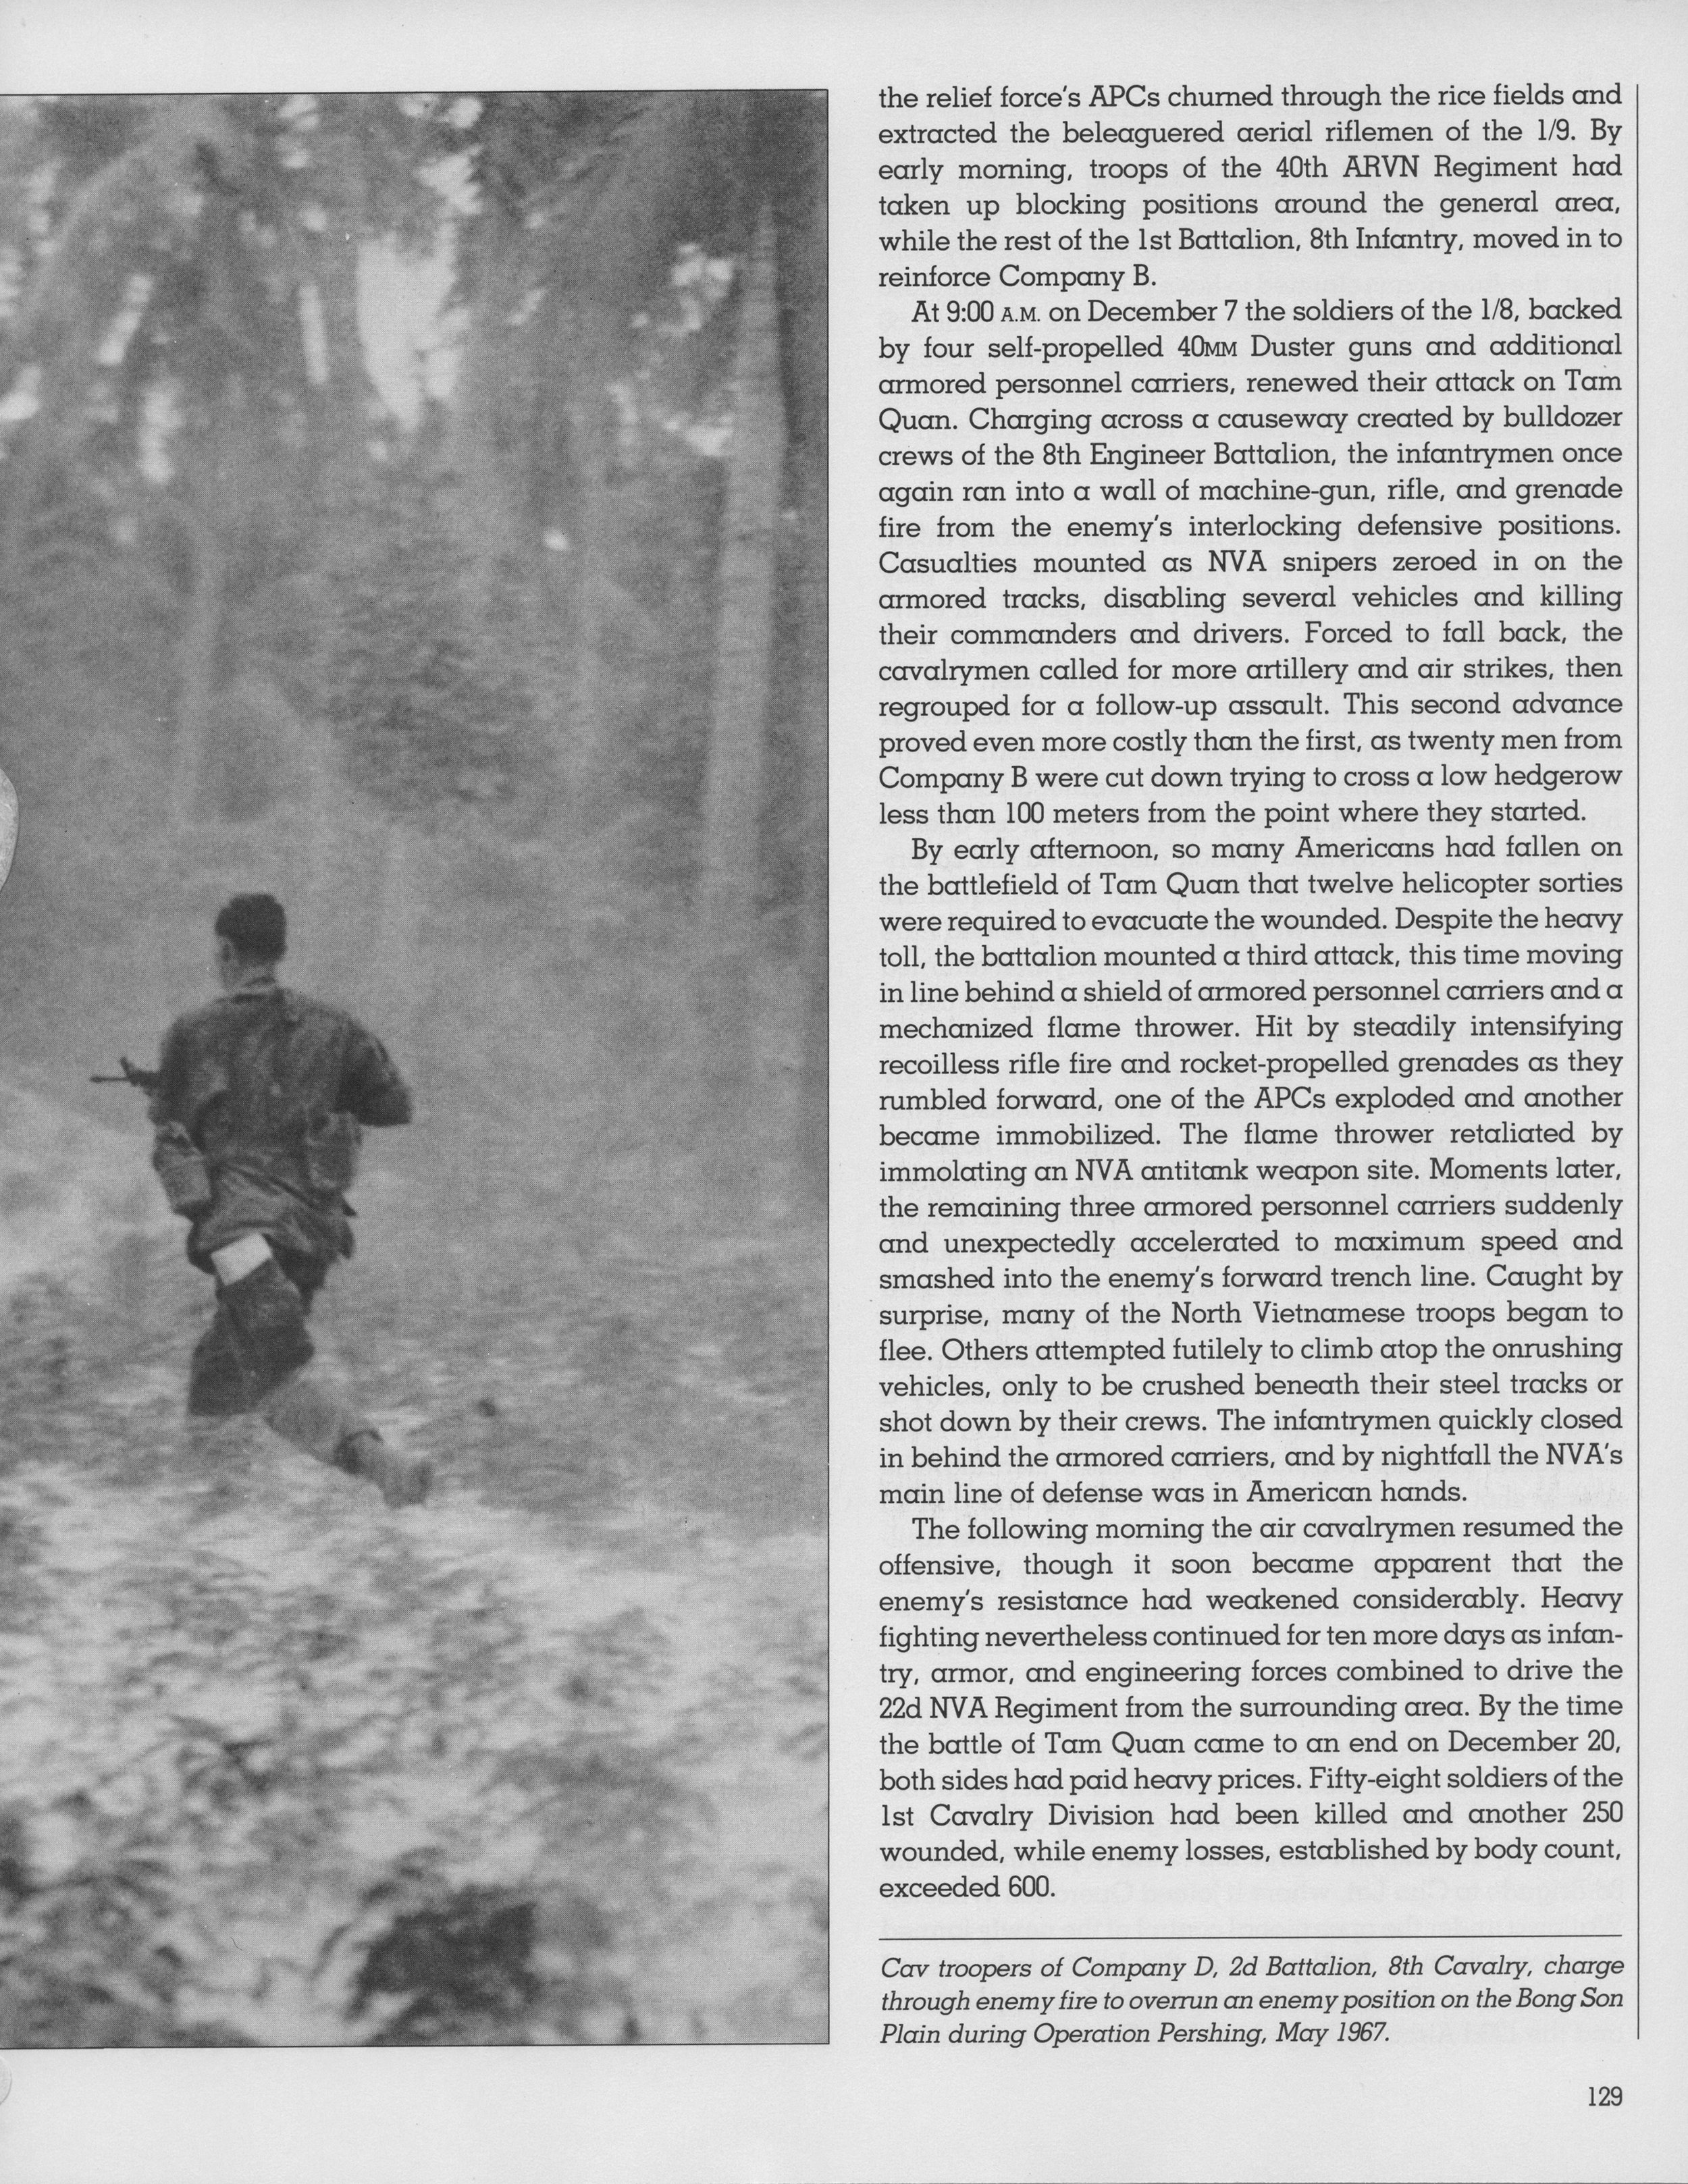  Full page view of  palm tree, page129, volume 21 of The Vietnam Experience.  